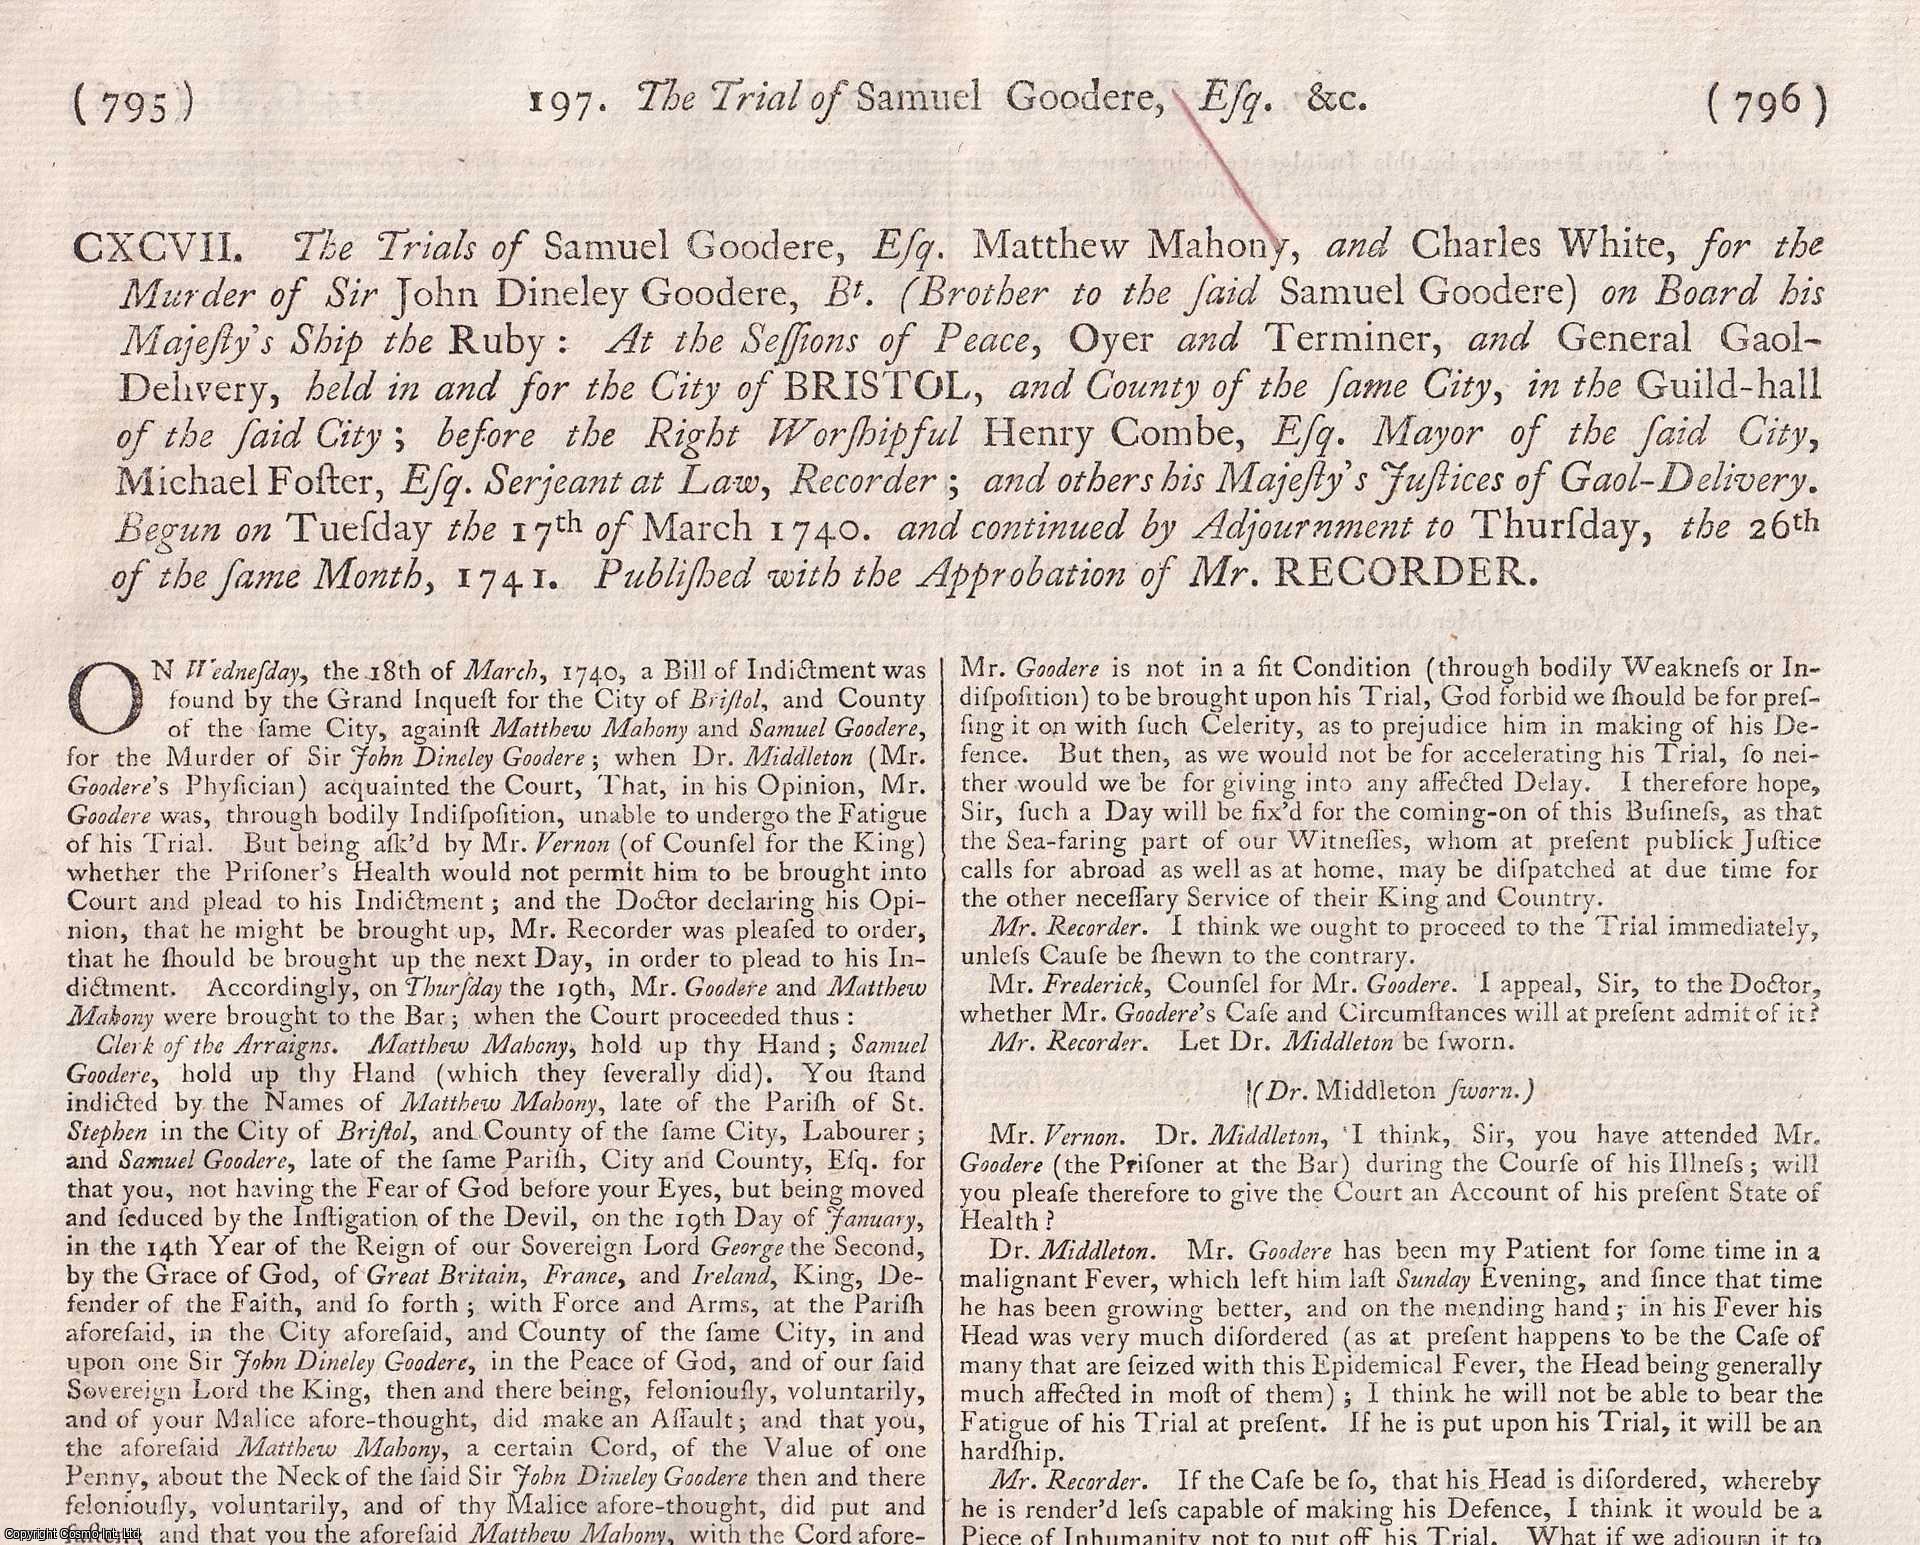 [Trial] - FRATRICIDE MURDER.The Trials of Samuel Goodere, Esq., Matthew Mahony, and Charles White, for the Murder of Sir John Dineley Goodere, Bt. (Brother to the said Samuel Goodere) on Board his Majesty's Ship the Ruby. Begun on Tuesday the 17th March 1740. Published with the Approbation of Mr. Recorder. An original article from the Collected State Trials.